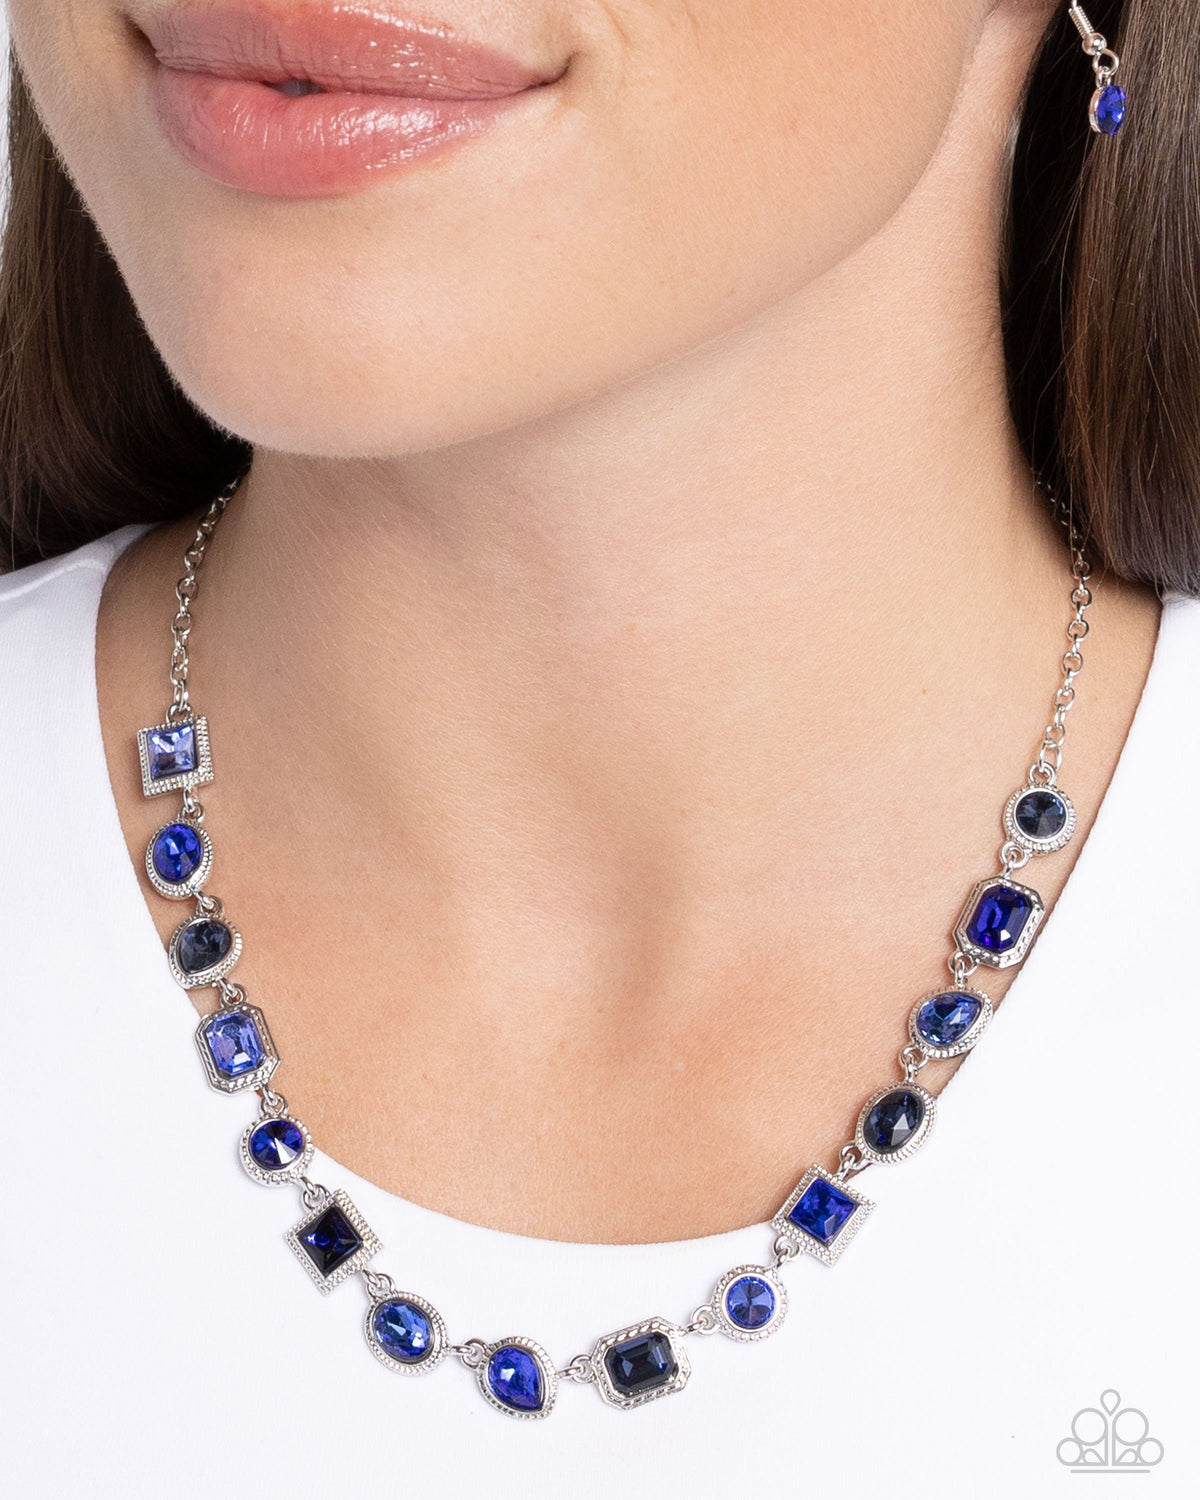 Gallery Glam Blue Rhinestone Necklace - Paparazzi Accessories-on model - CarasShop.com - $5 Jewelry by Cara Jewels